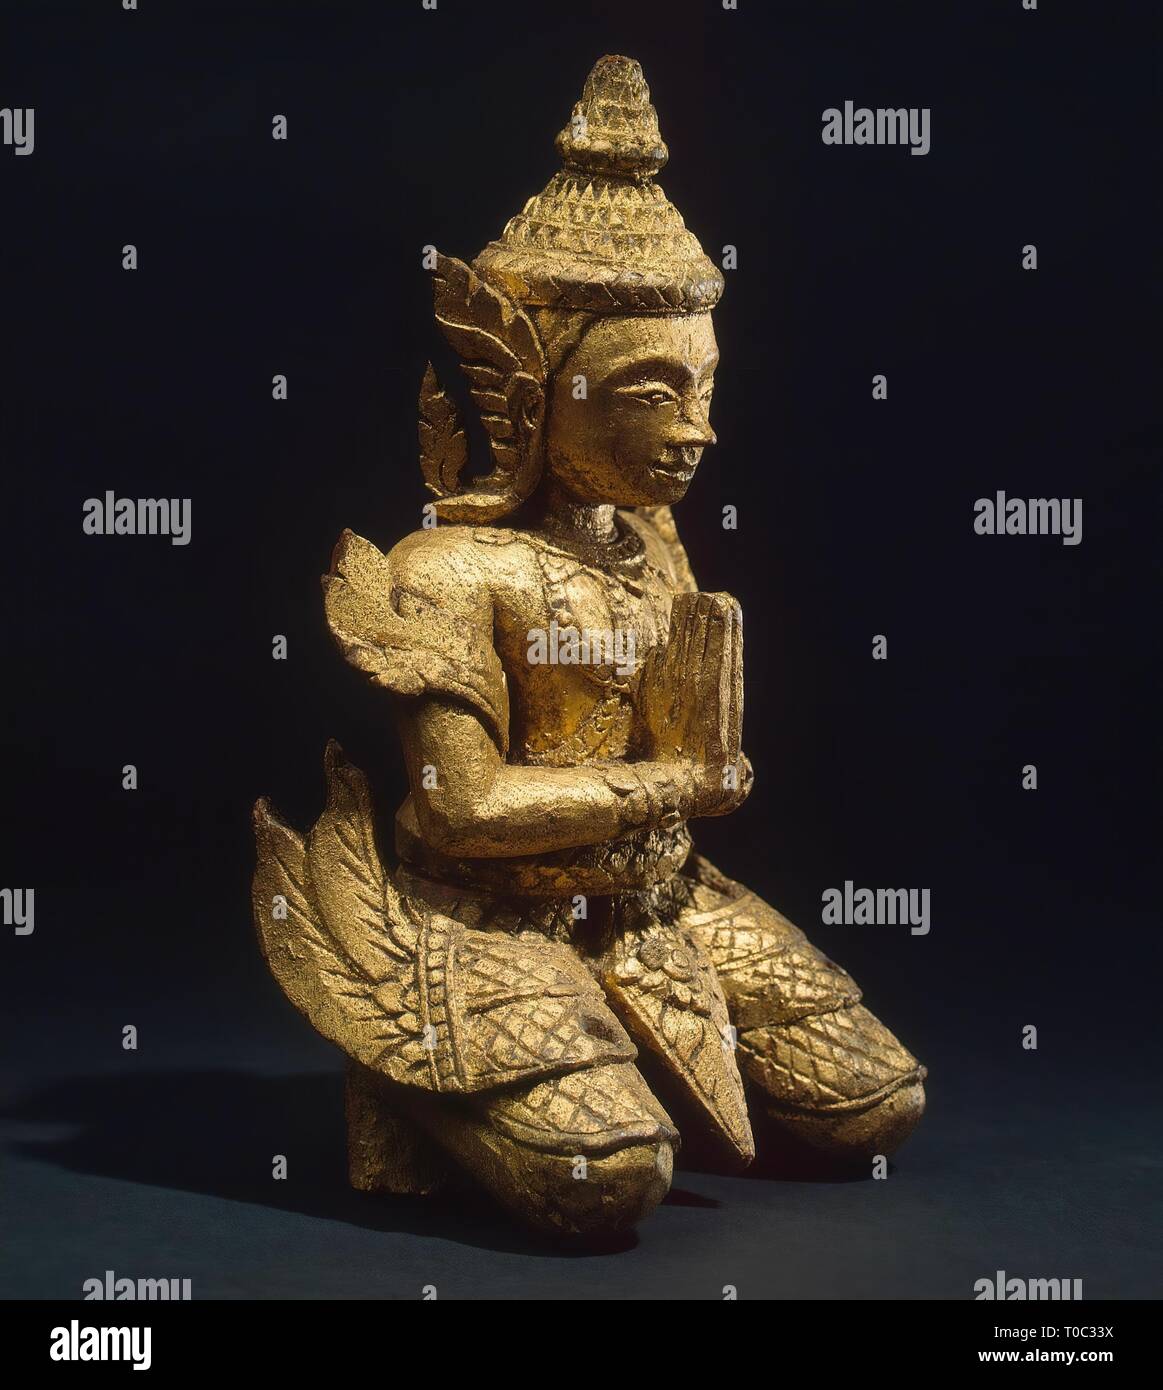 'Kneeling Adorer'. Siam (now Thailand). Bangkok art, Late 18th - early of the 19th century. Dimensions: h. 20 cm. Museum: State Hermitage, St. Petersburg. Stock Photo